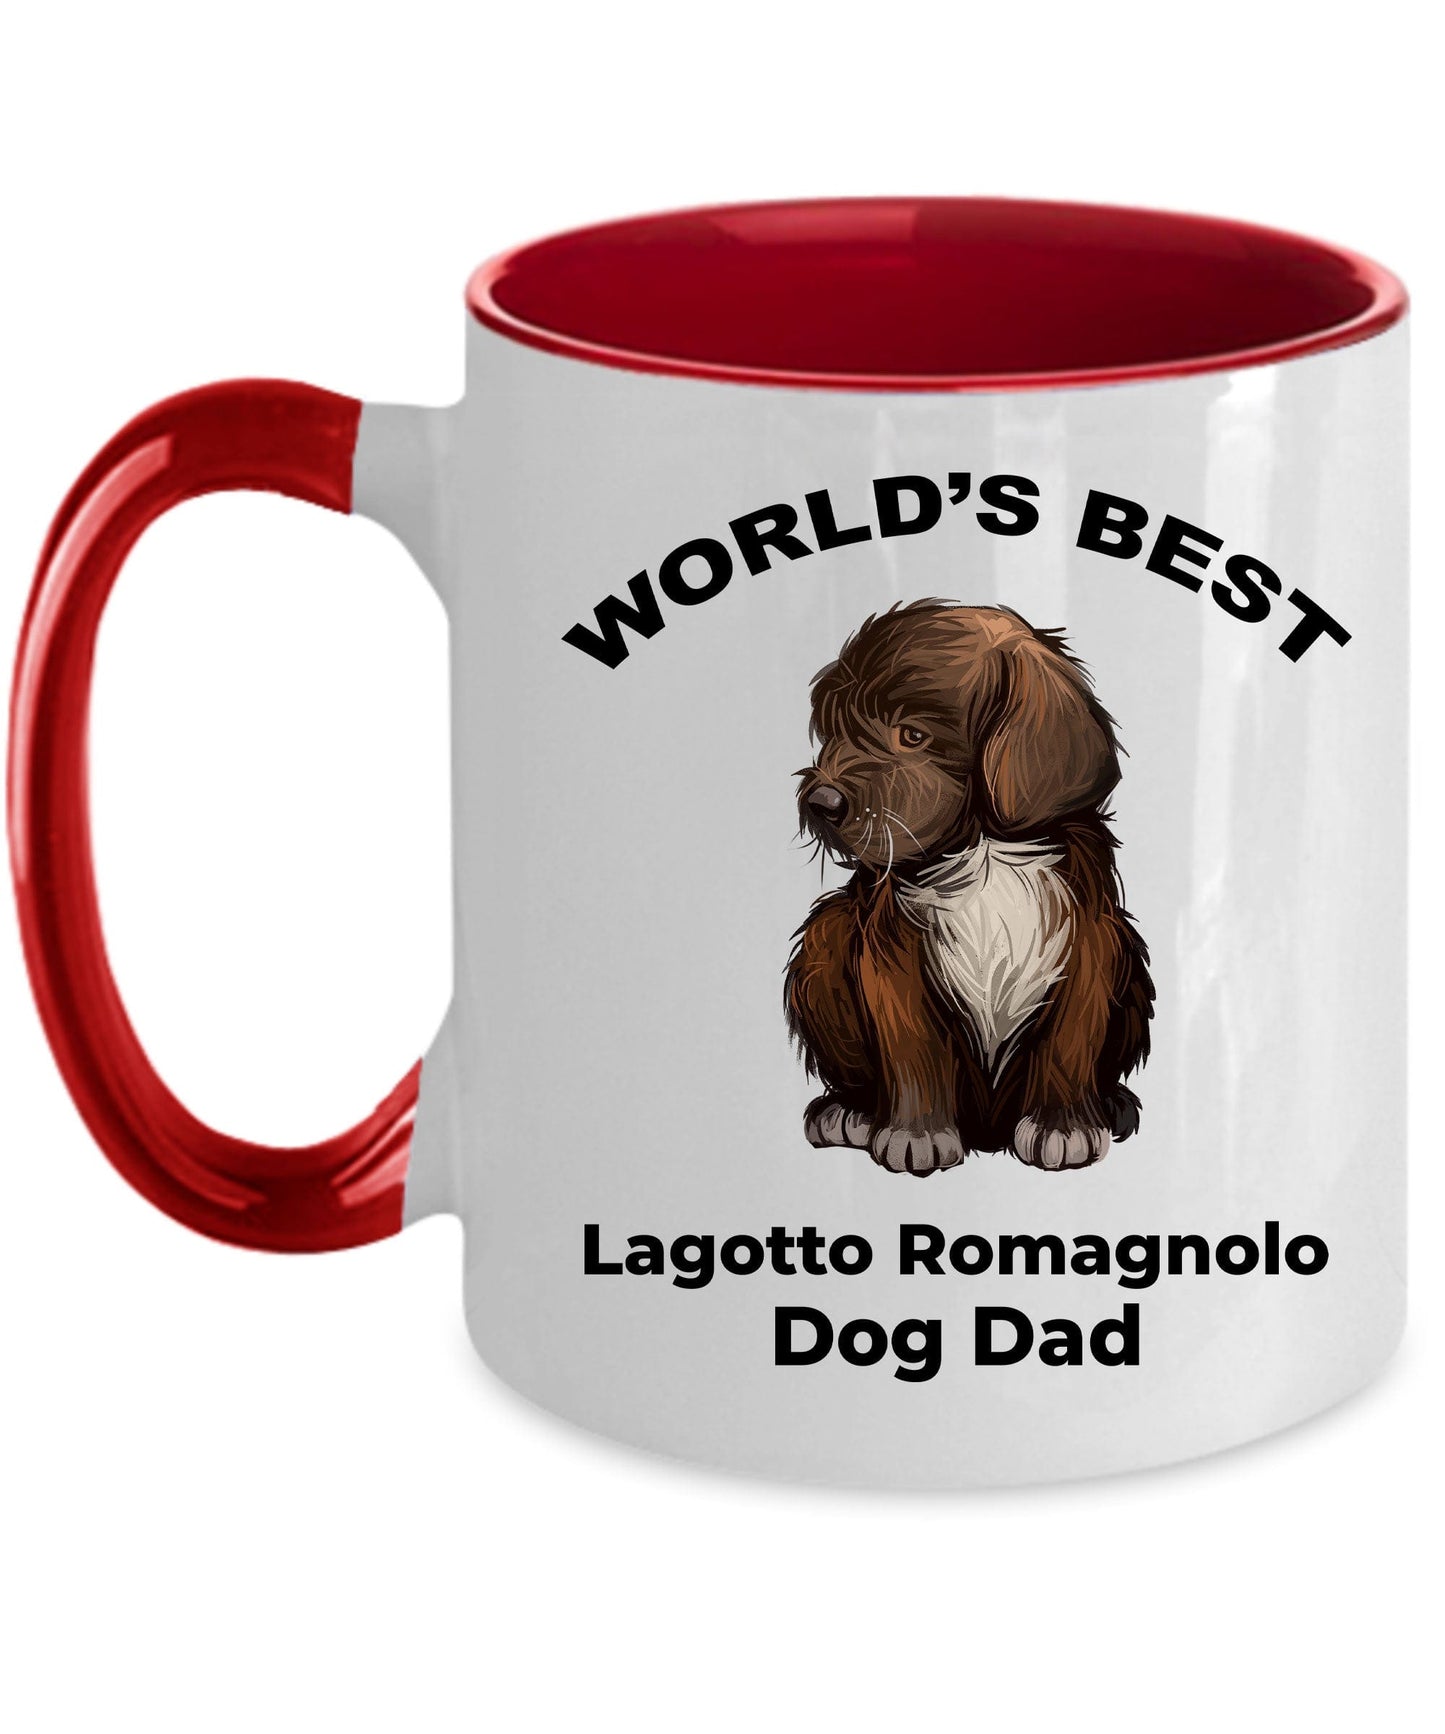 Lagotto Romagnolo Best Dog Dad ceramic coffee mug - can be customized